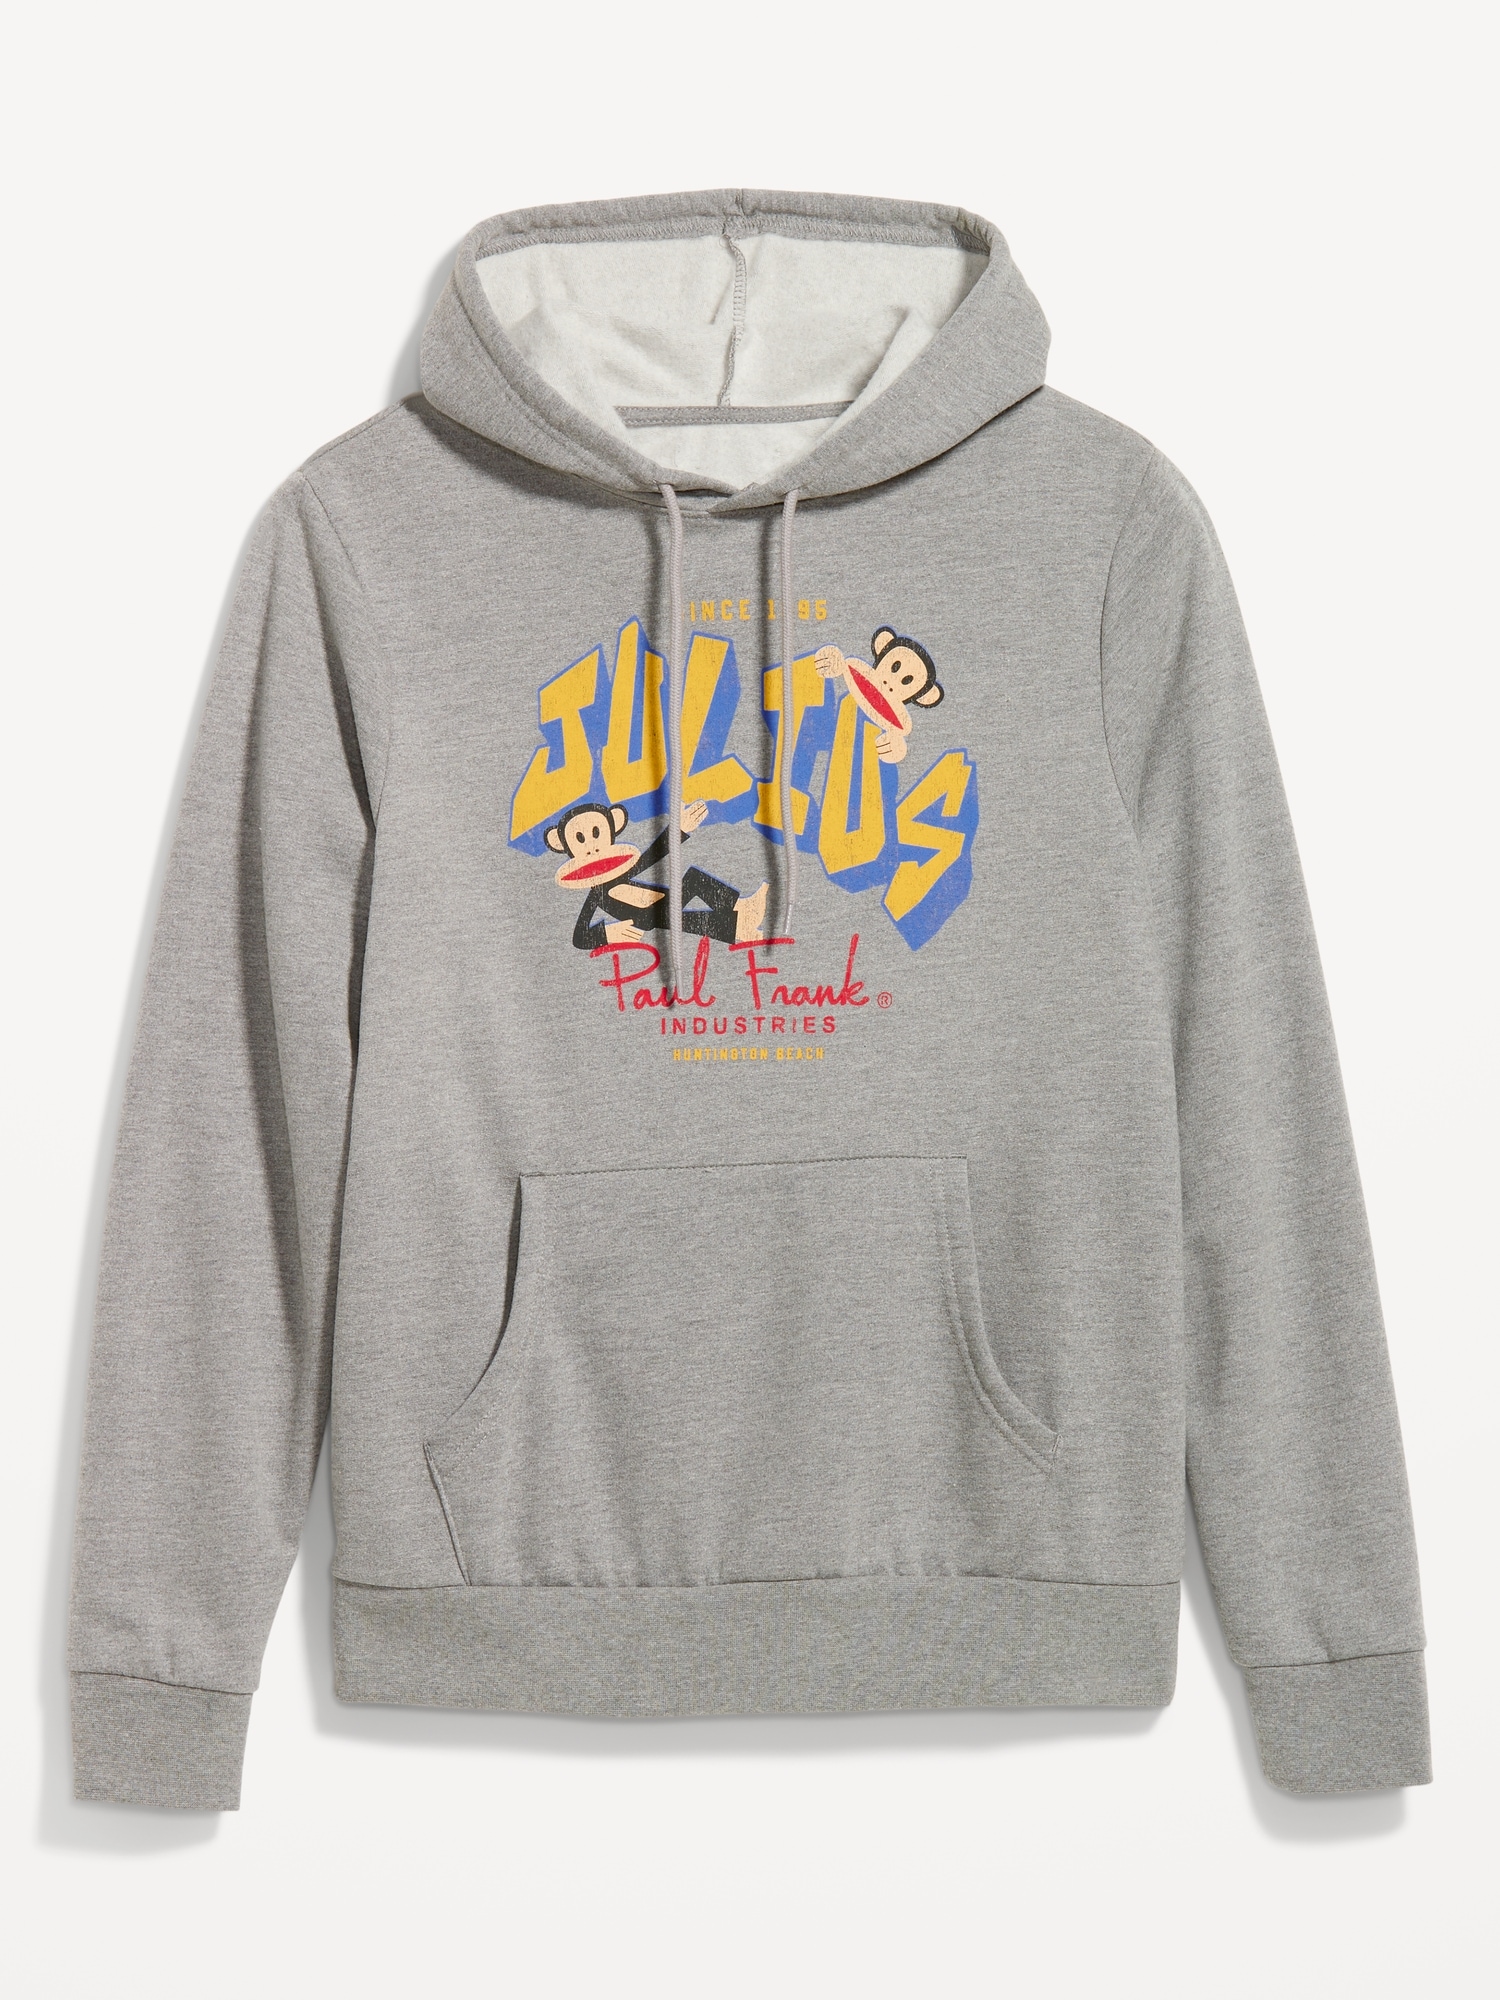 Paul Frank Gender-Neutral Pullover Hoodie for Adults